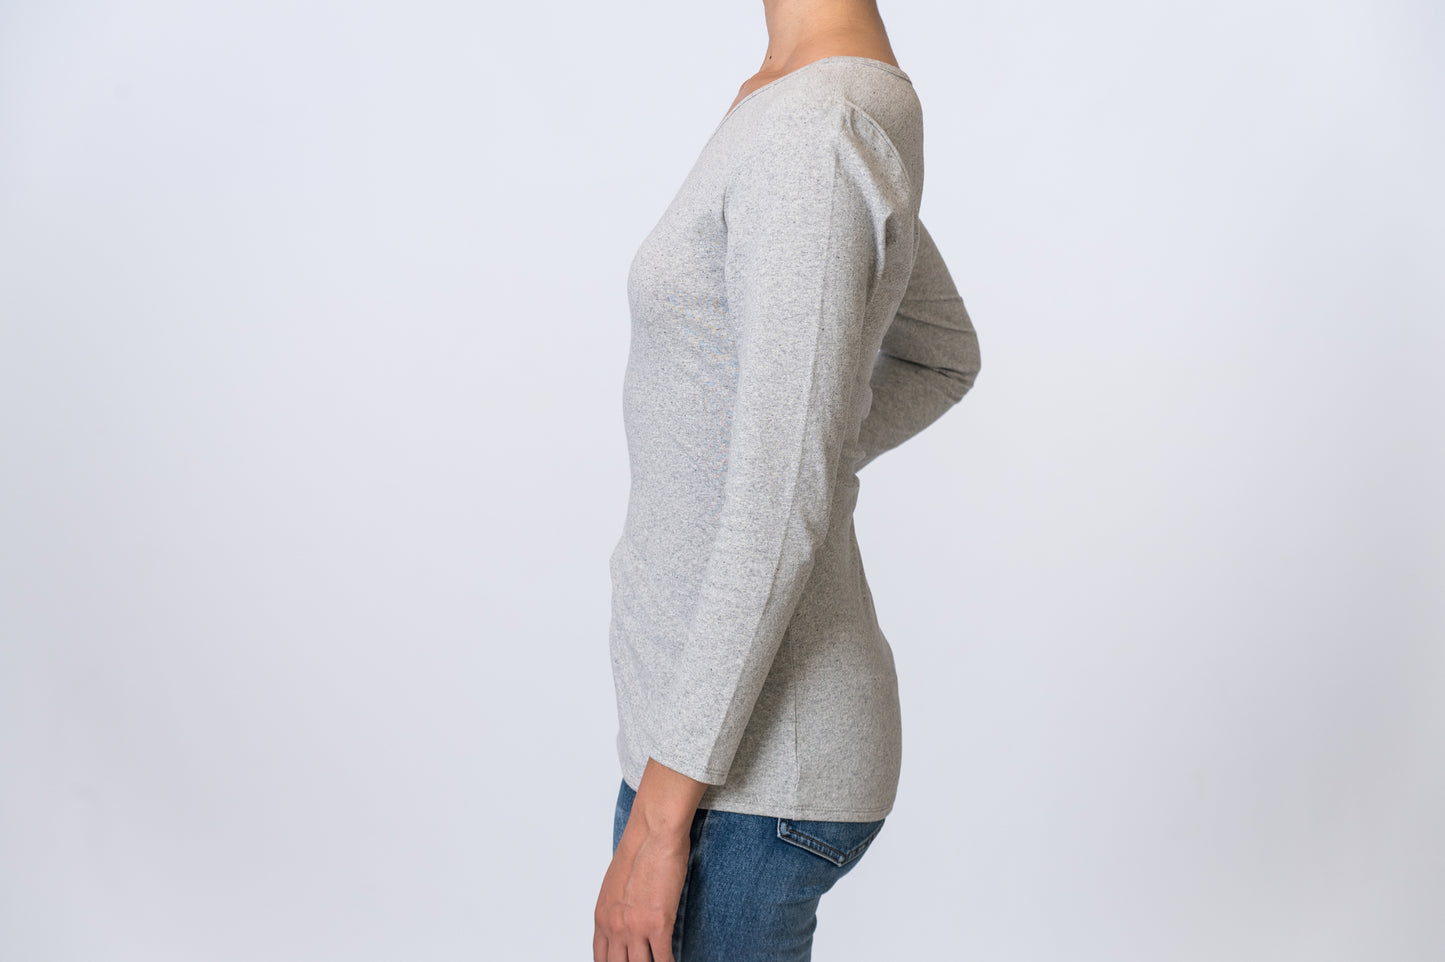 Woman wearing a light gray, asymmetric neck long sleeve top with medium wash jeans. Side of clothing is being shown